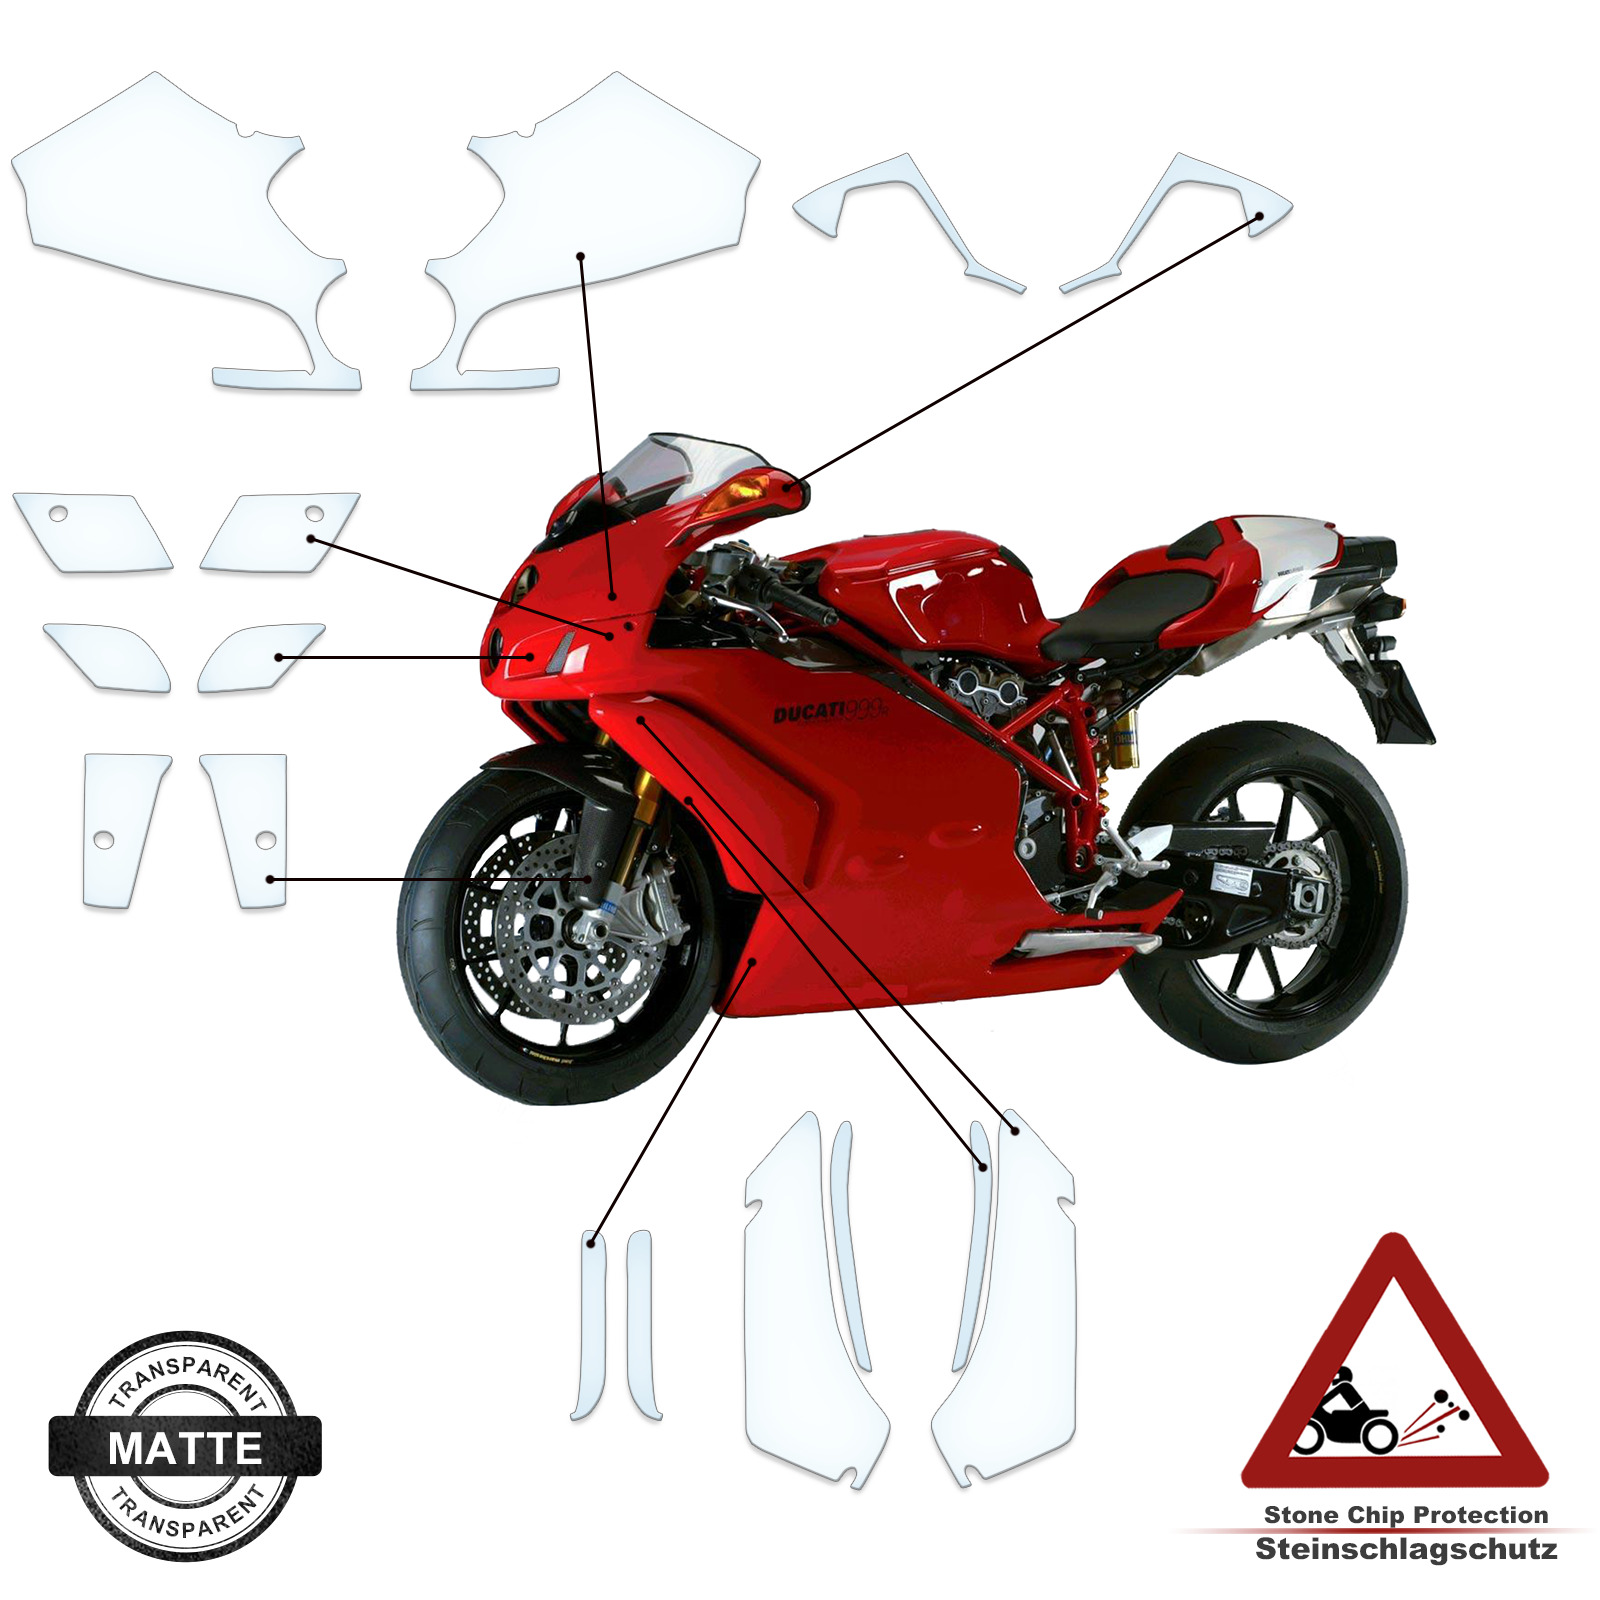 TPU Paint Protection suitable for Ducati 999/749 2003-2006 matte